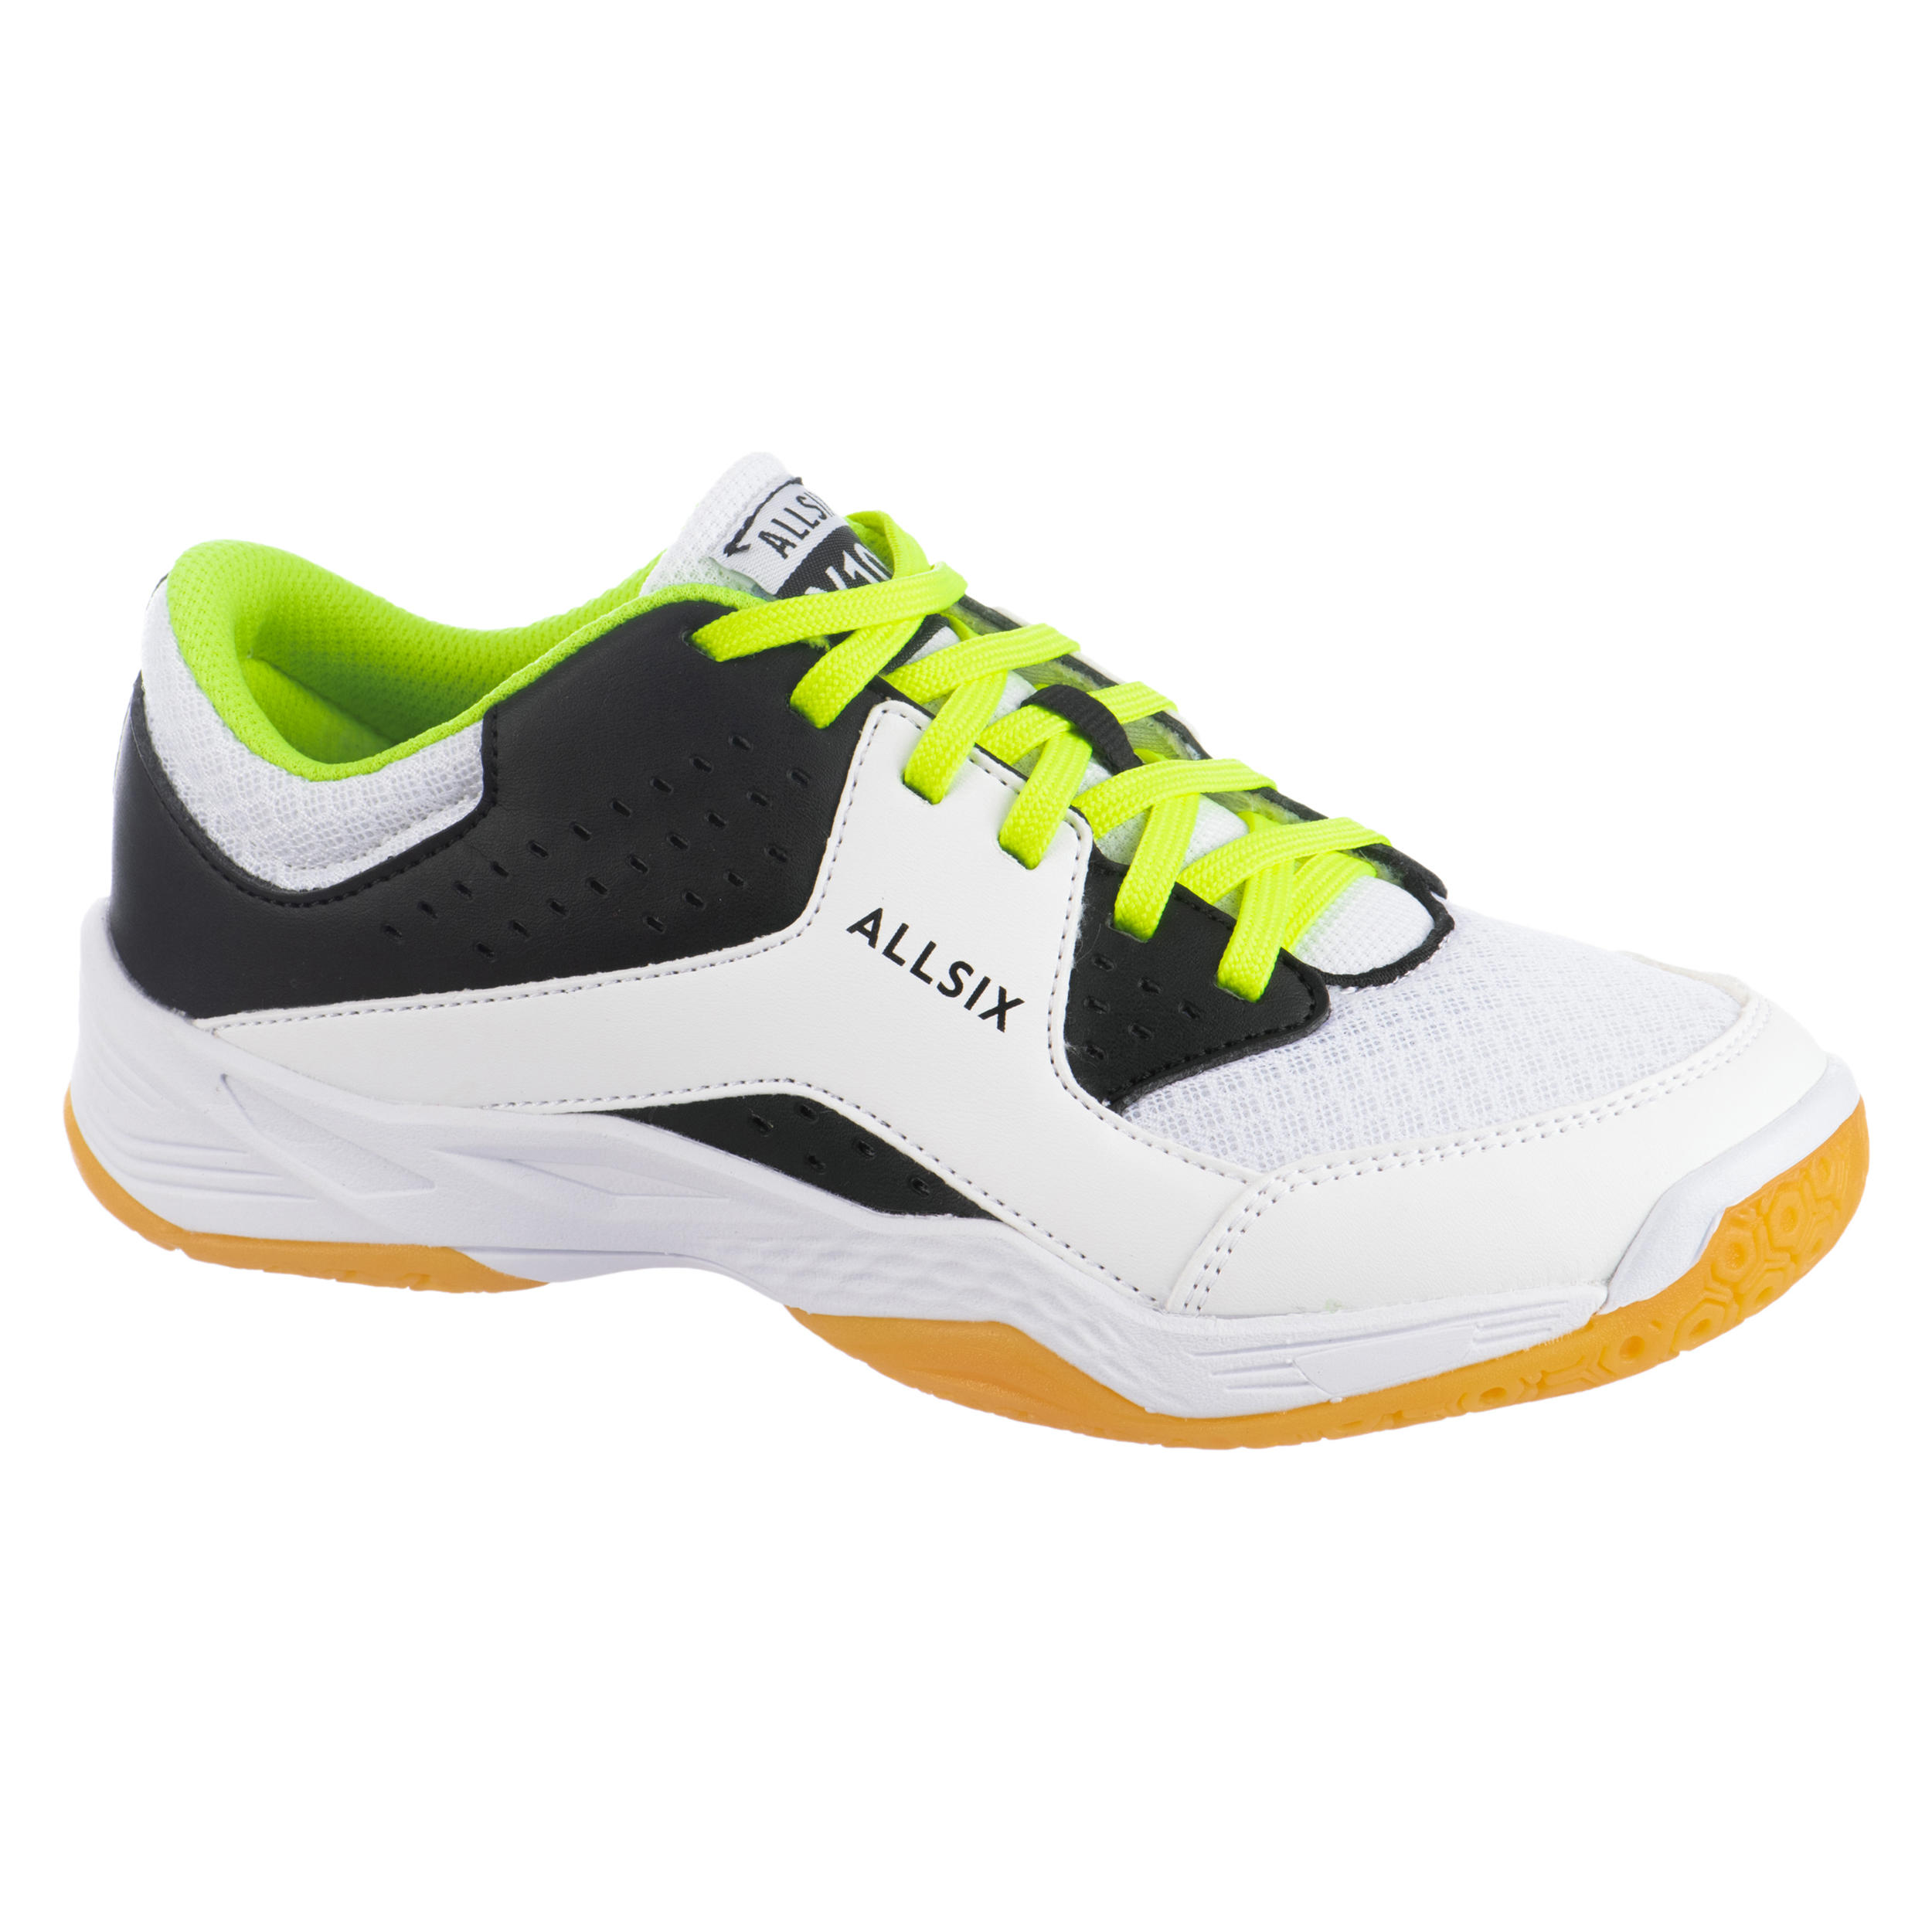 Kids' Volleyball Lace-Up Shoes - White/Black/Yellow 1/3